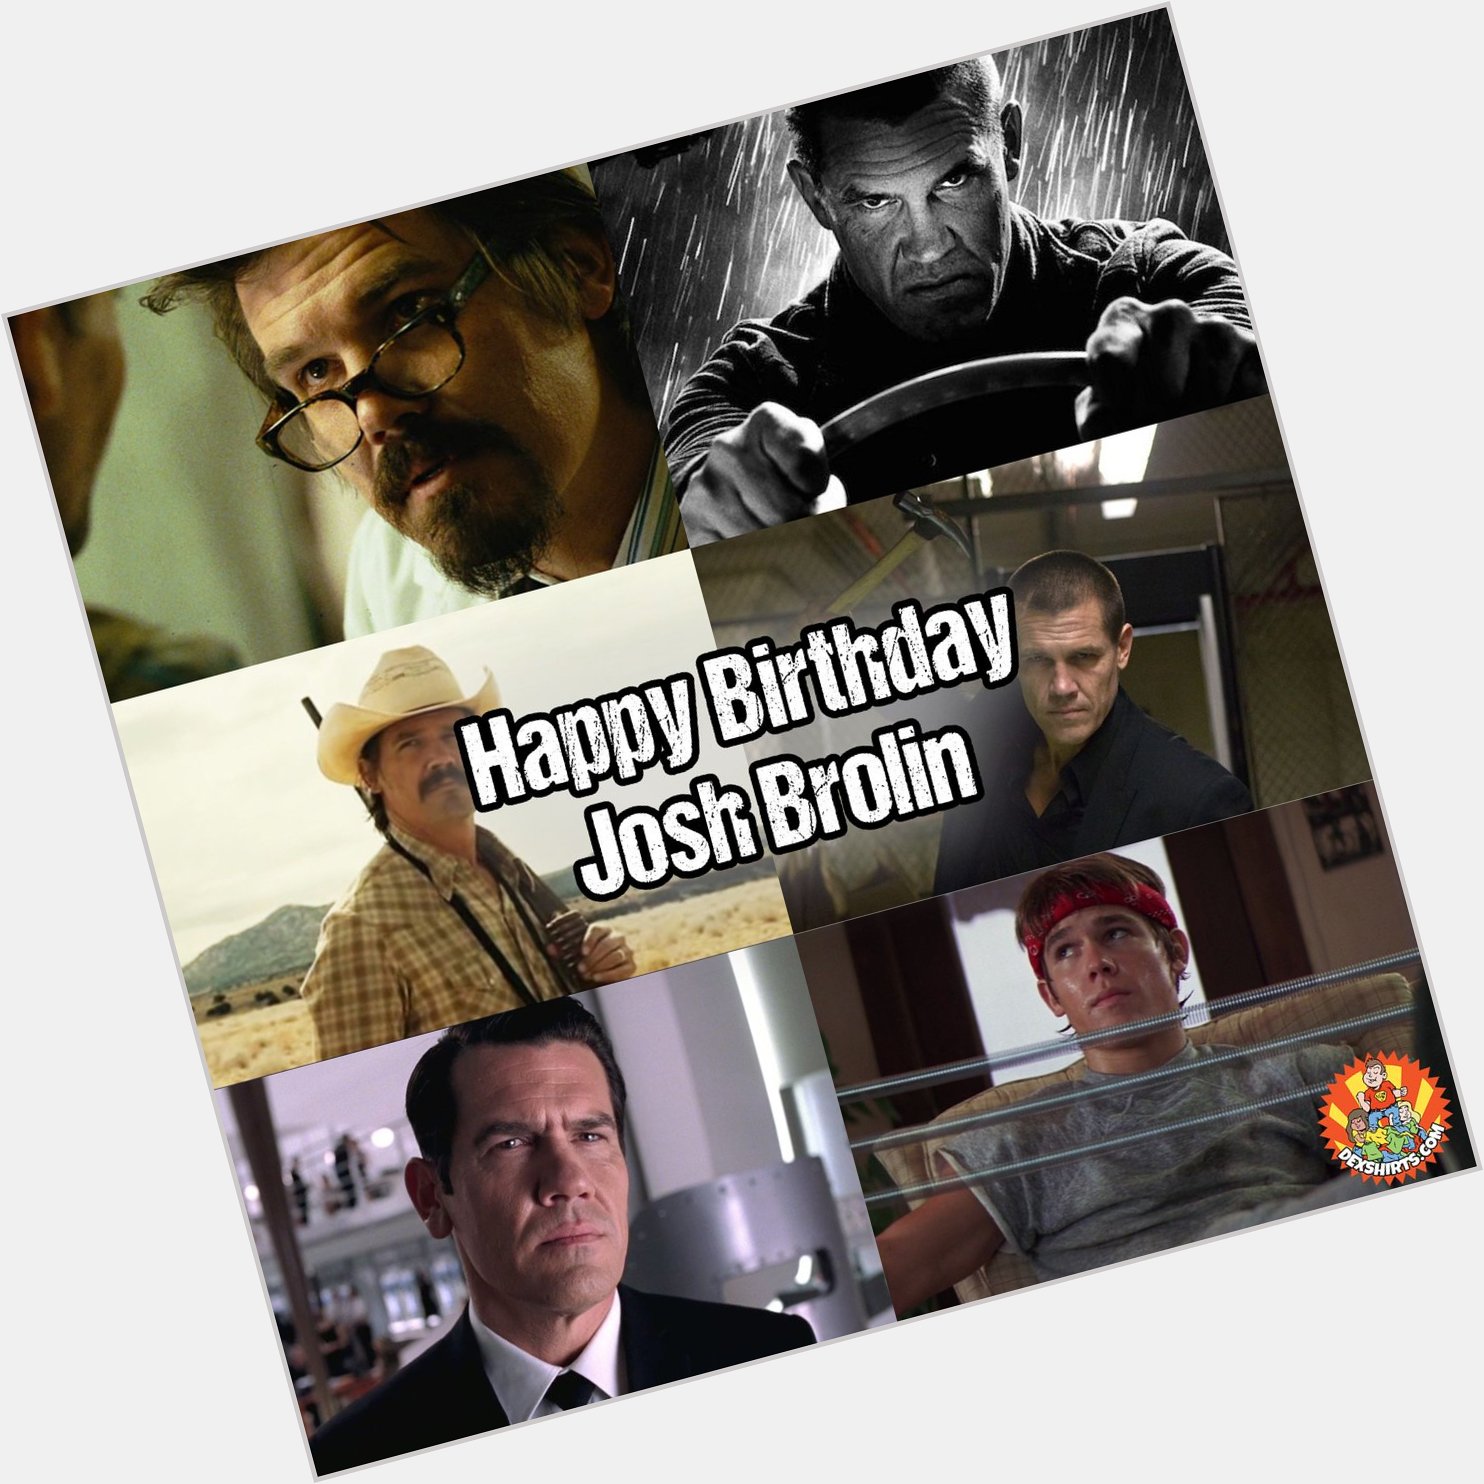 He\s played some of our favourite roles over the years. Happy Birthday Josh Brolin, 49 today! 